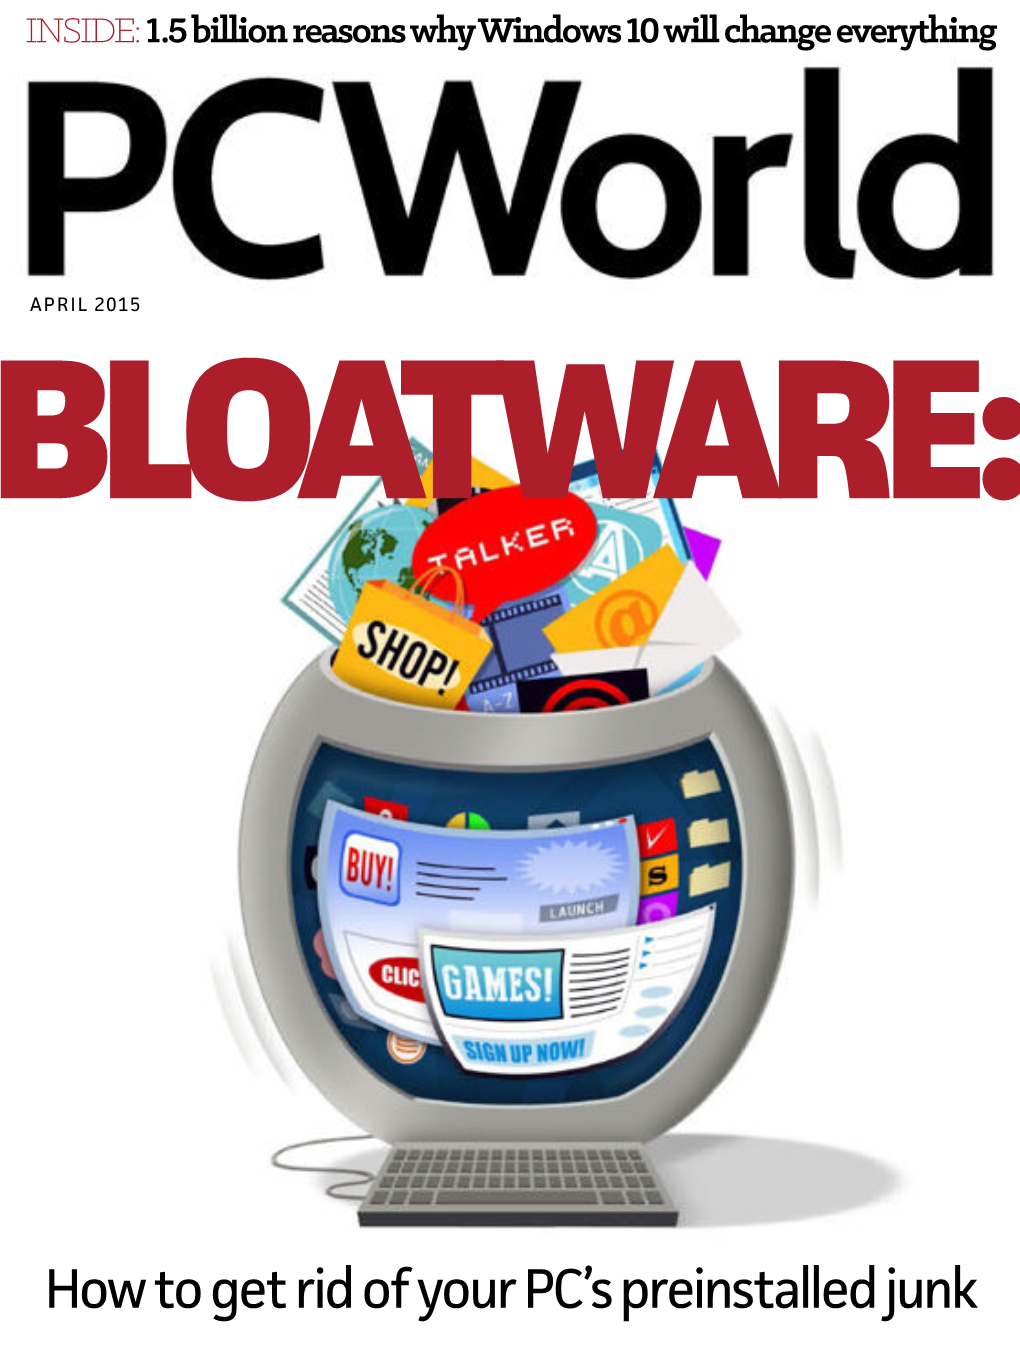 PC World and Consumer Watch Are Registered Trademarks of International Data Group, Inc., and Used Under License by IDG Consumer & SMB, Inc